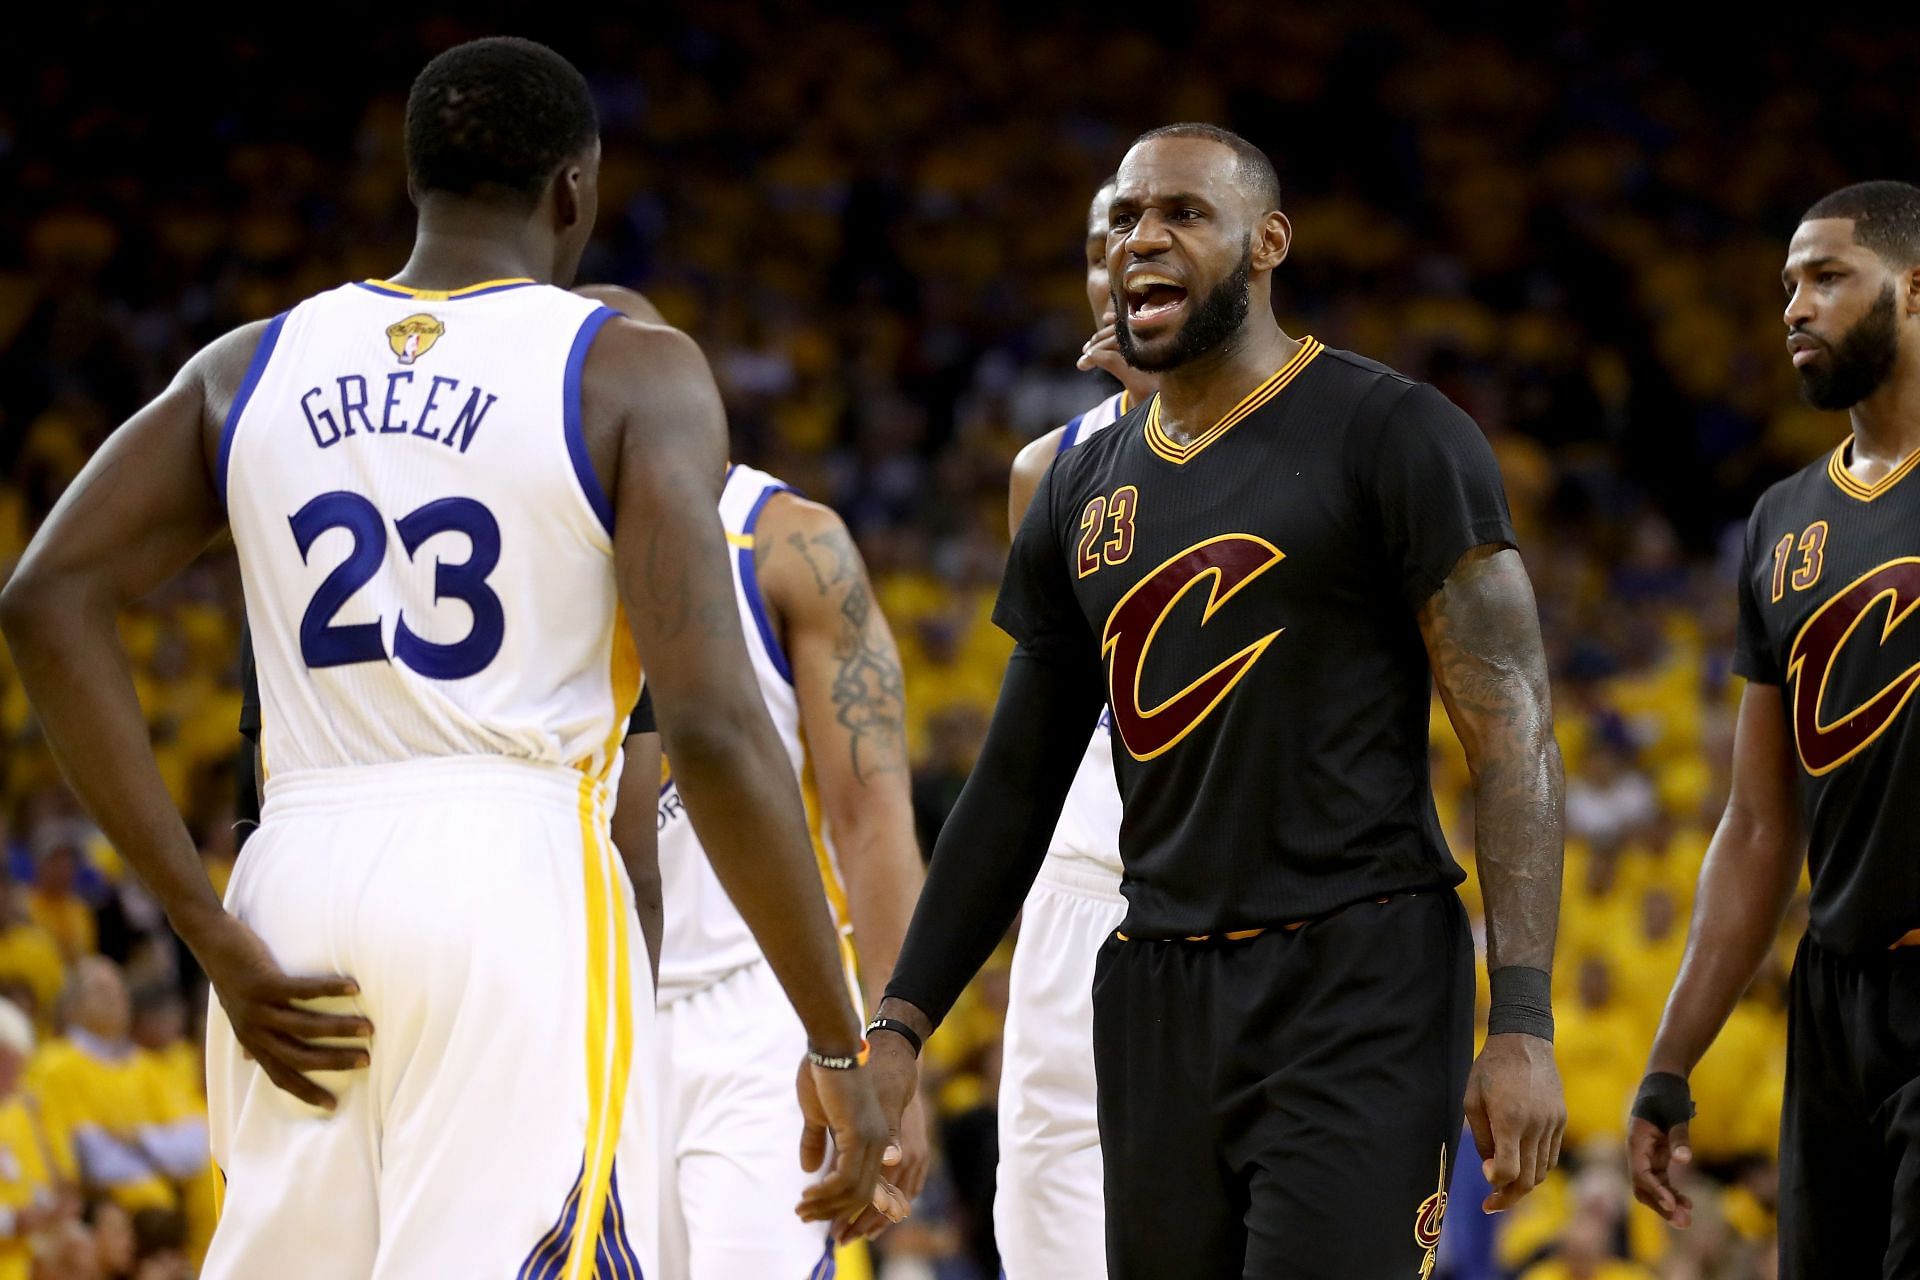 Draymond Green and LeBron James have had many amazing duels. (Image via Getty Images)